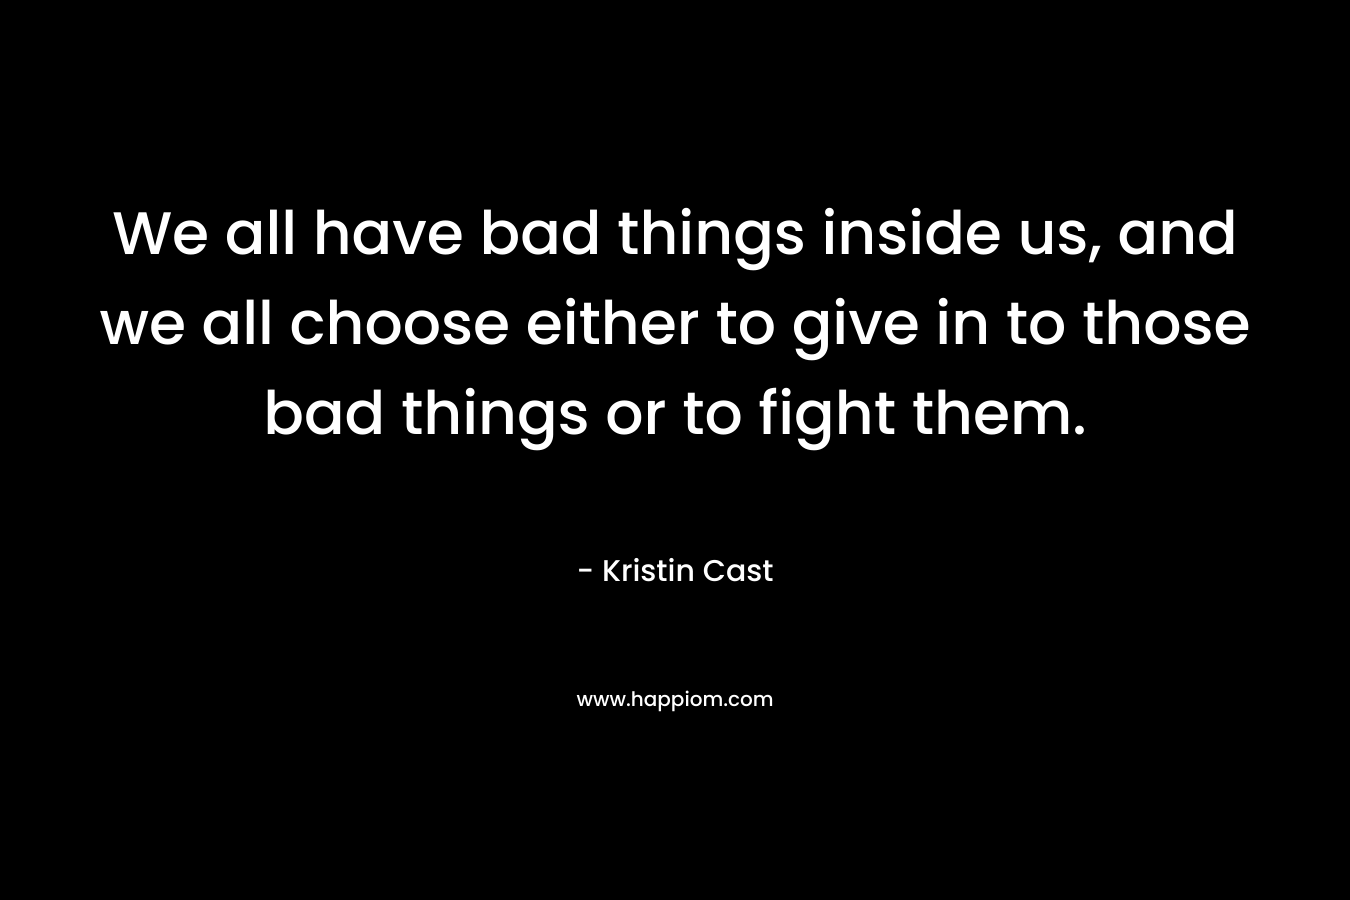 We all have bad things inside us, and we all choose either to give in to those bad things or to fight them.